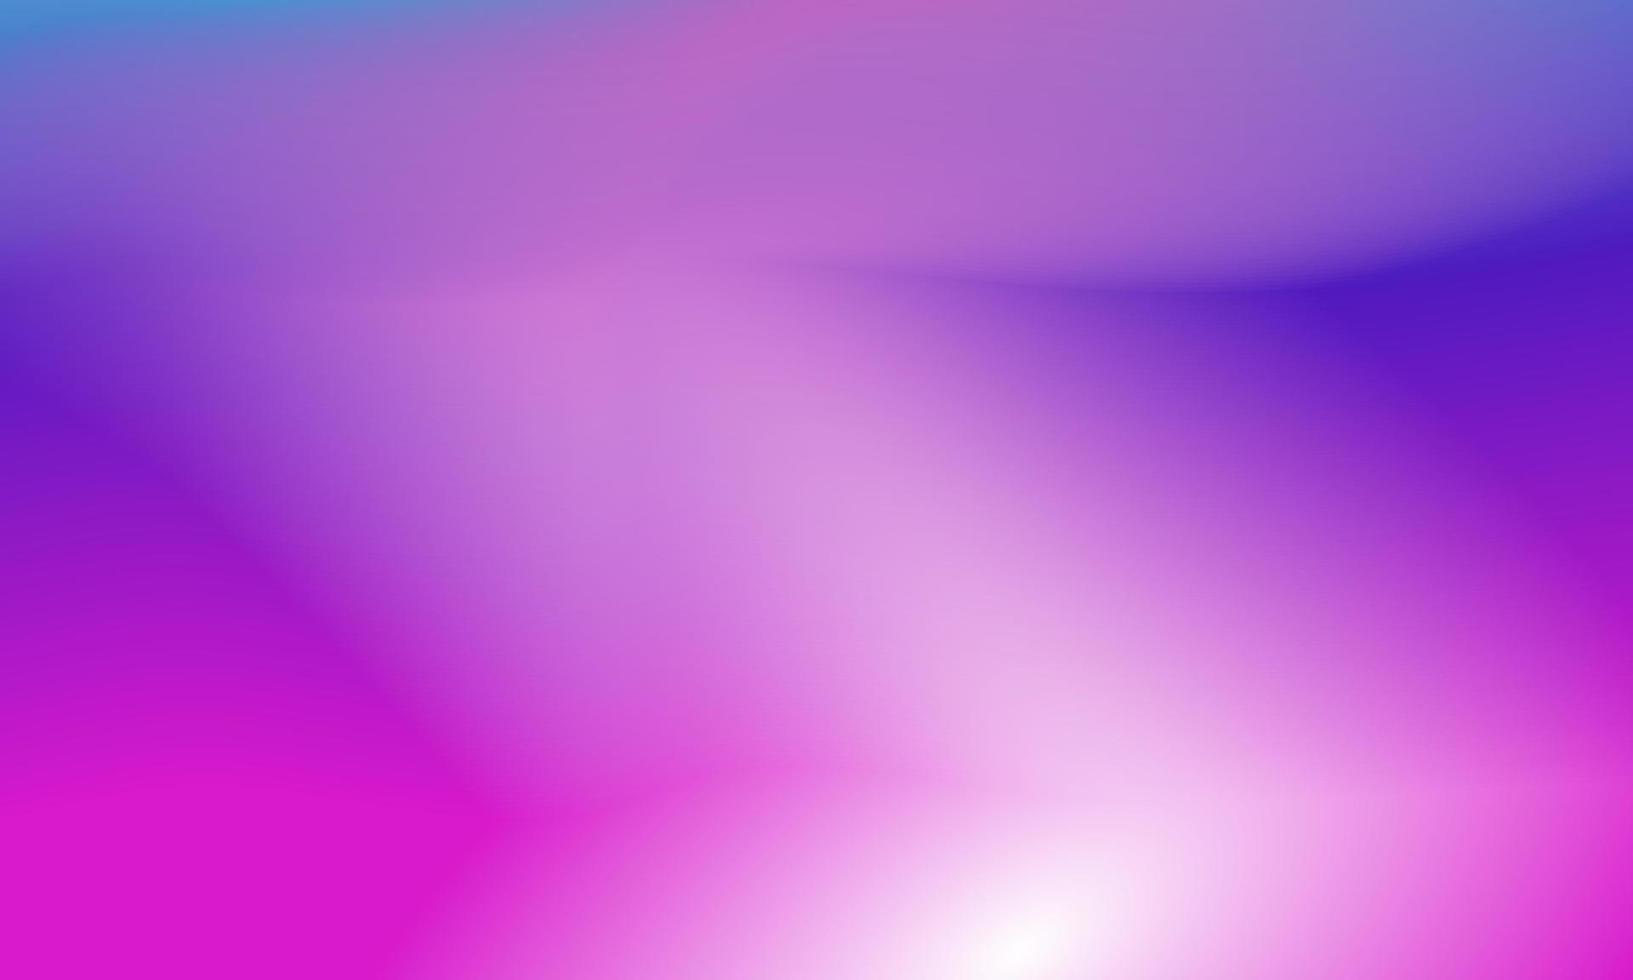 Beautiful gradient background blue and pink smooth and soft texture vector